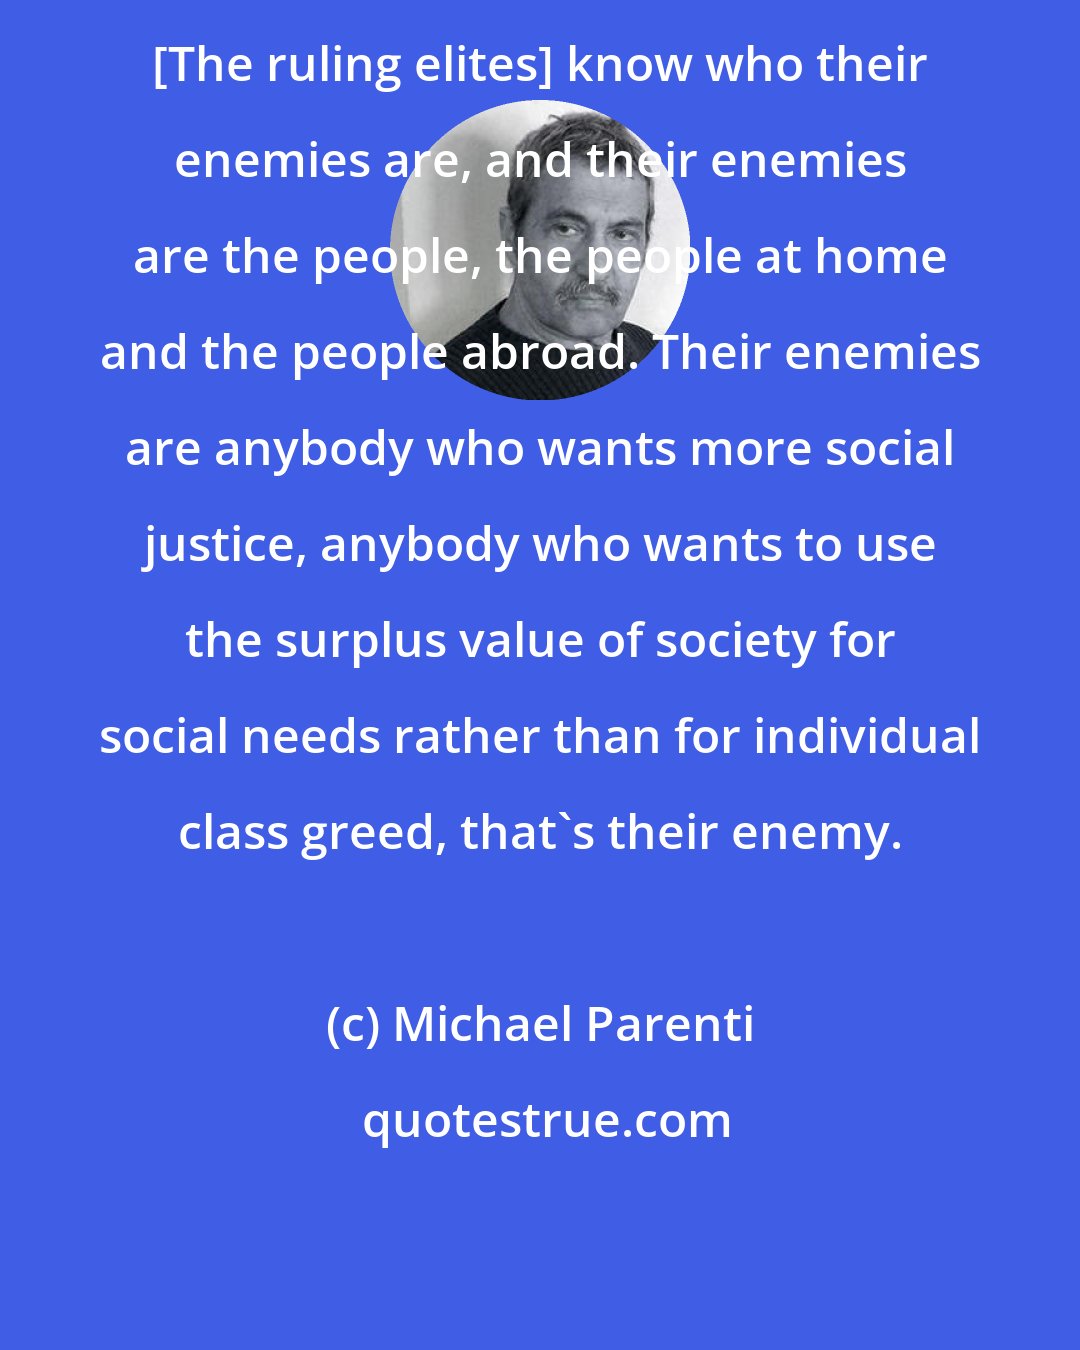 Michael Parenti: [The ruling elites] know who their enemies are, and their enemies are the people, the people at home and the people abroad. Their enemies are anybody who wants more social justice, anybody who wants to use the surplus value of society for social needs rather than for individual class greed, that's their enemy.